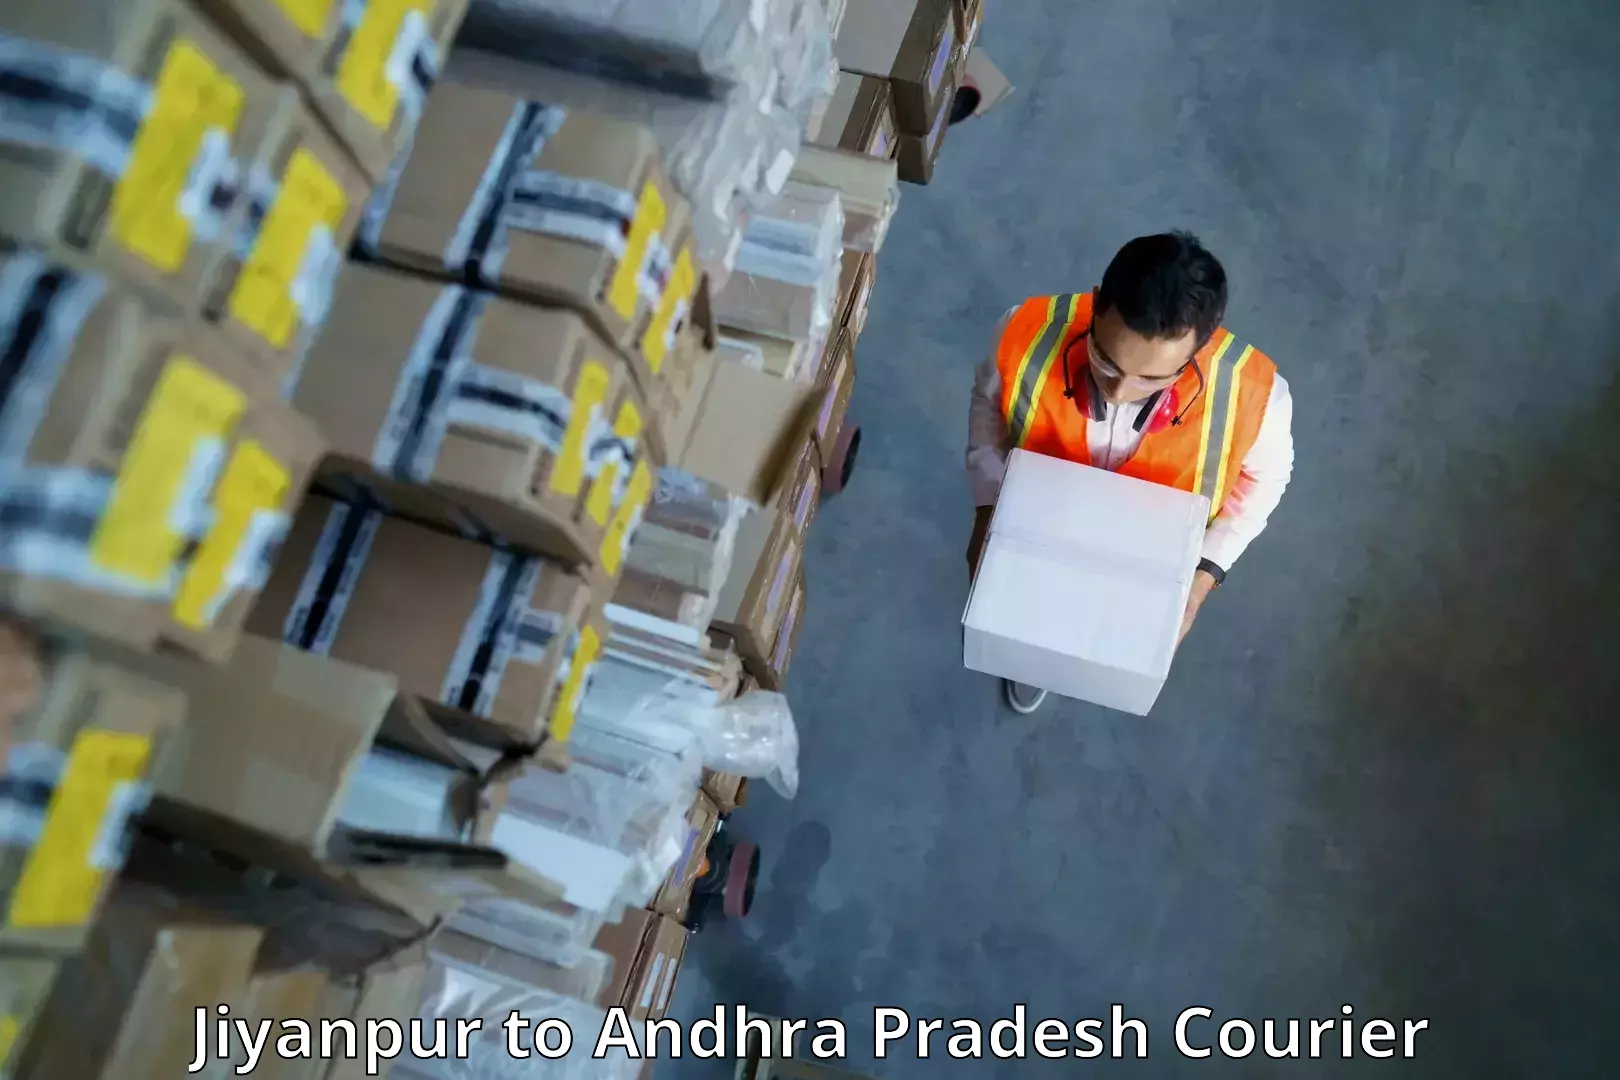 Easy access courier services Jiyanpur to Pedapadu